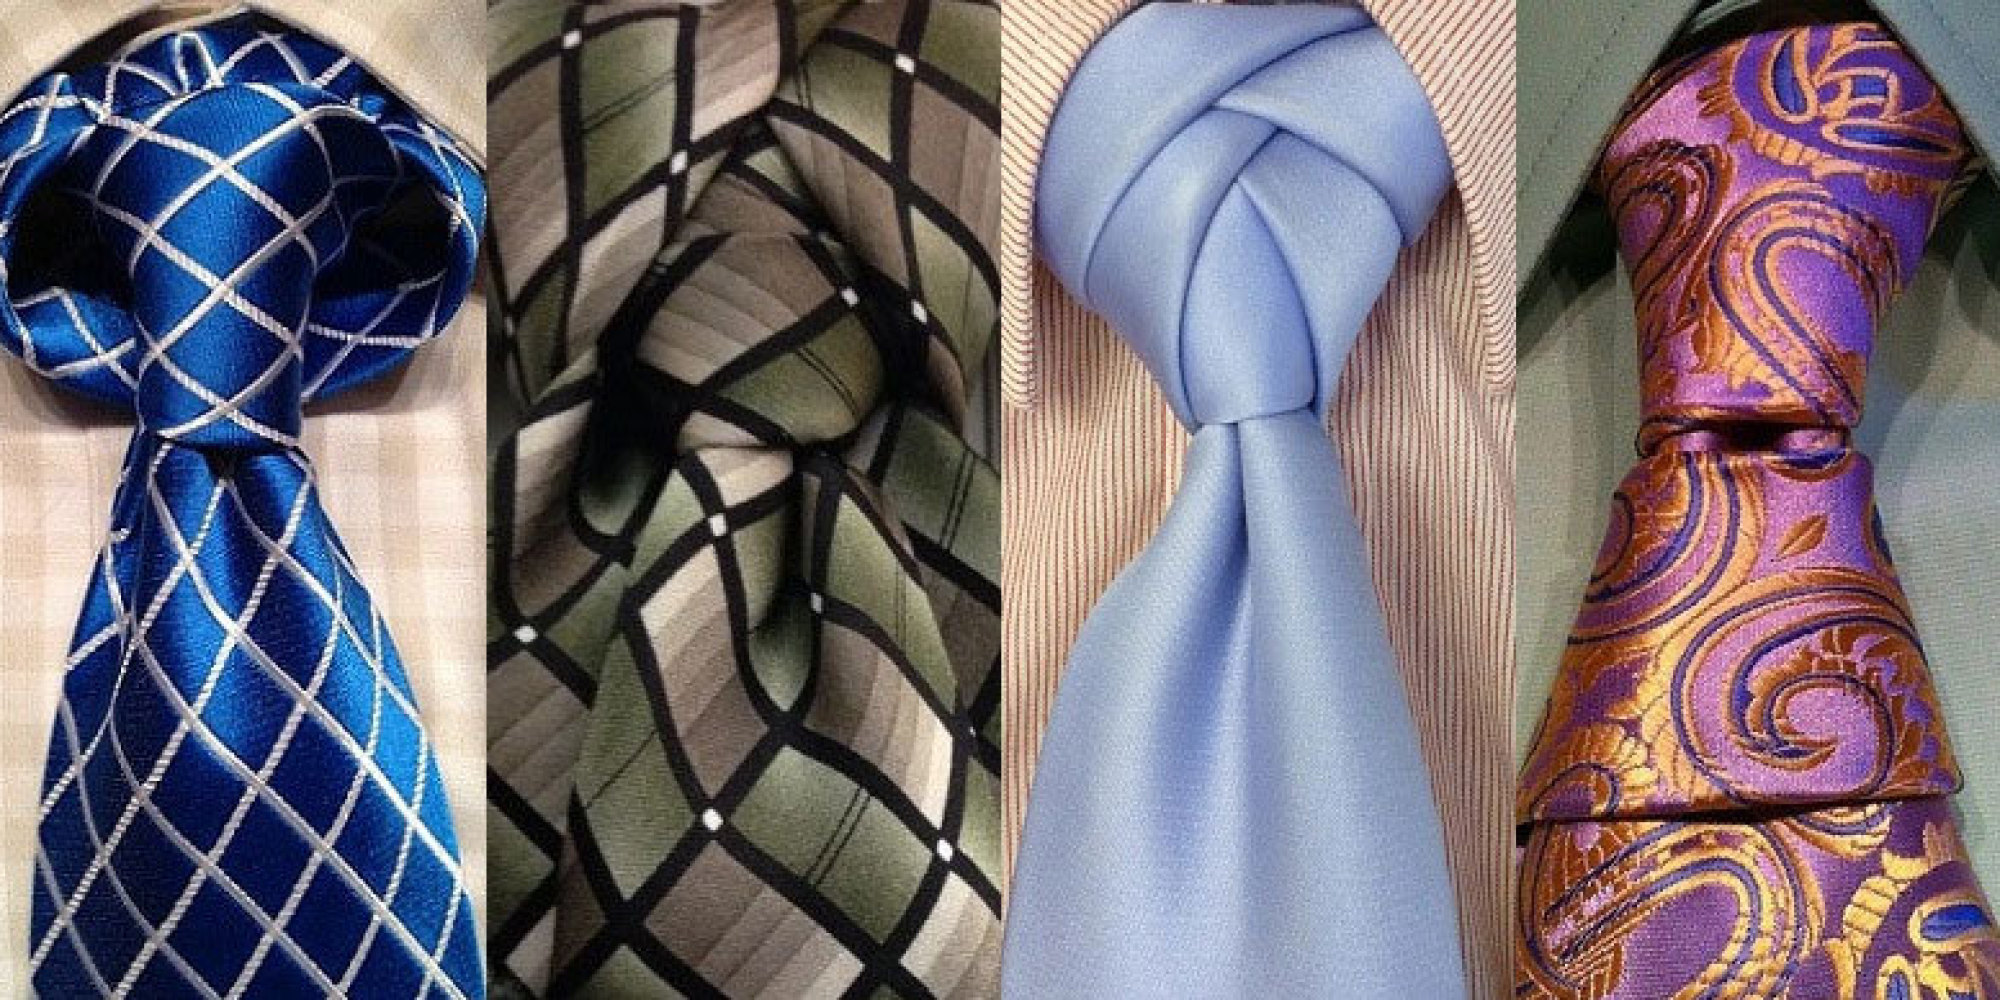 30 Different Ways To Tie A Tie That Every Man Should Know Shirtsmyway